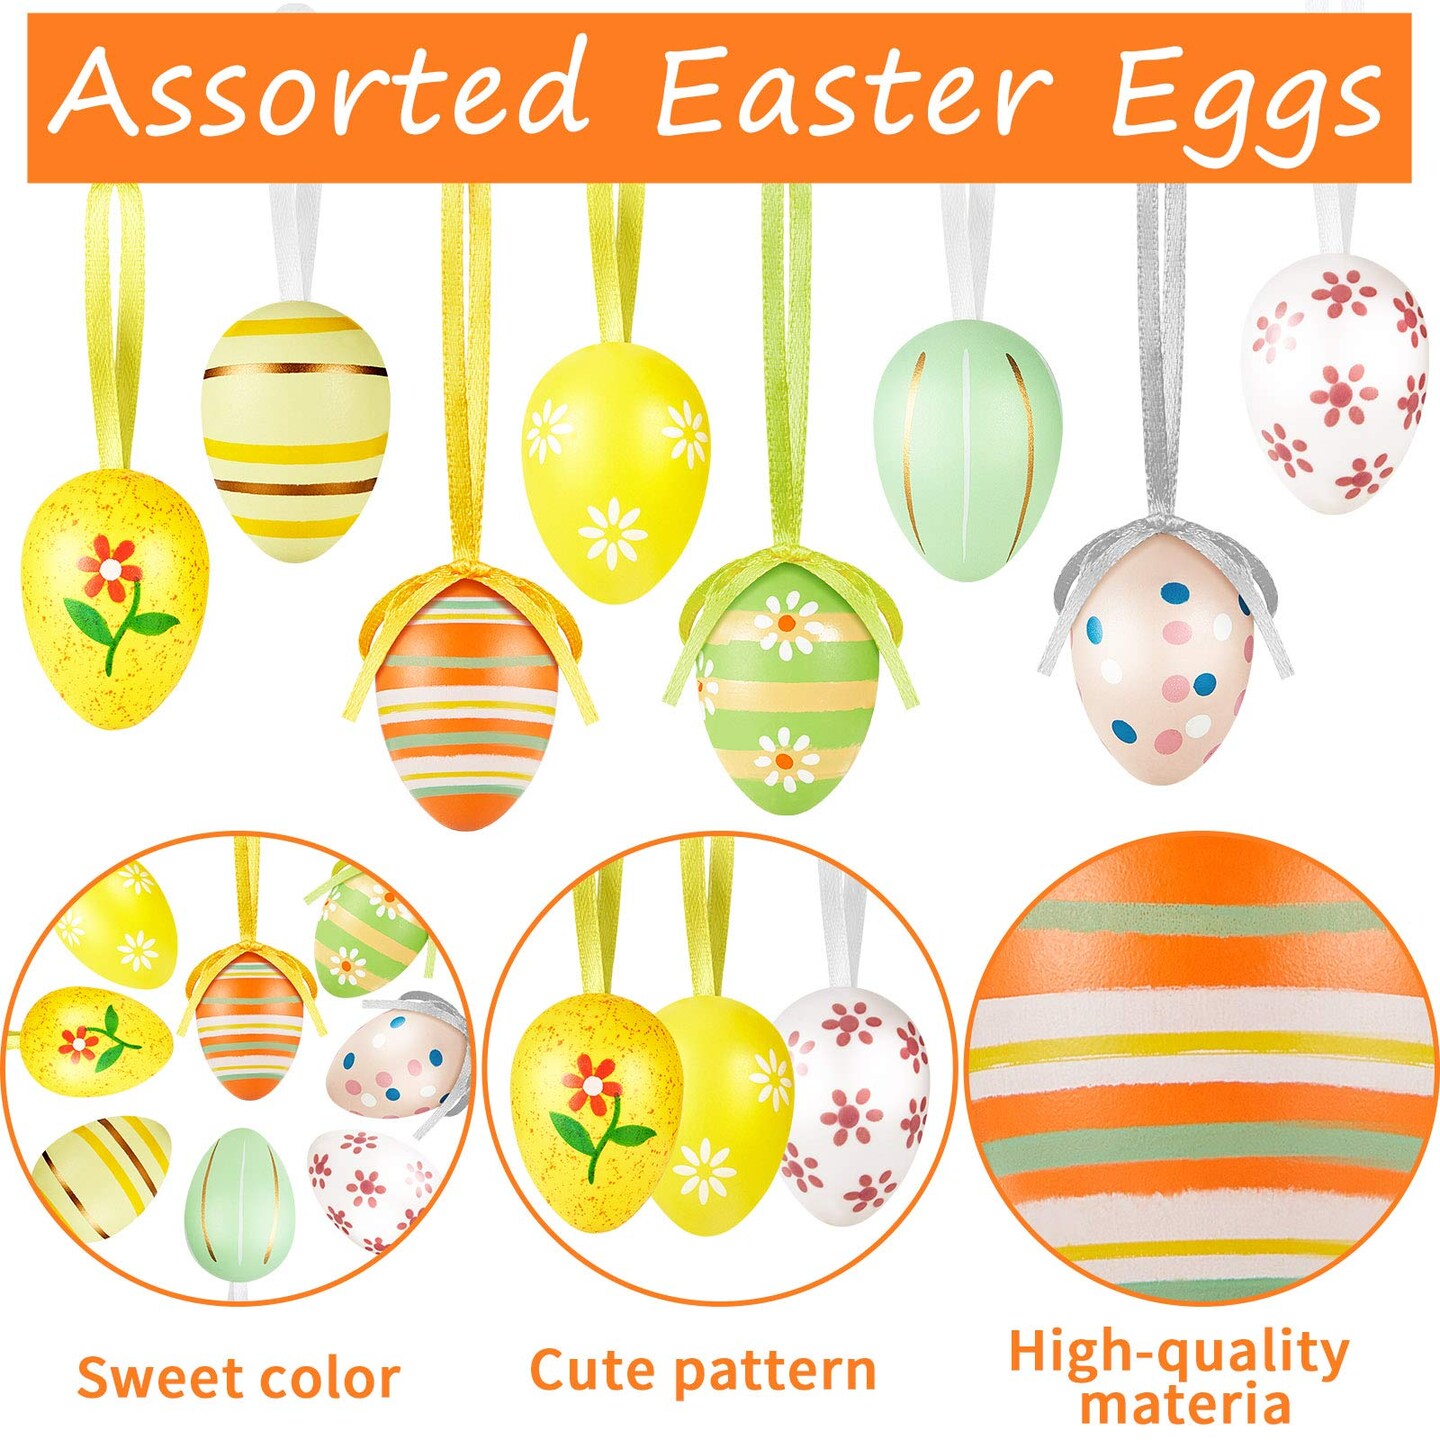 24 Pieces Easter Hanging Eggs Multicolored Plastic Easter Egg Hanging Ornaments Easter Decorations for Tree with Ropes for DIY Crafts Party Favor Home Decor (1.57 x 1.18 Inch)